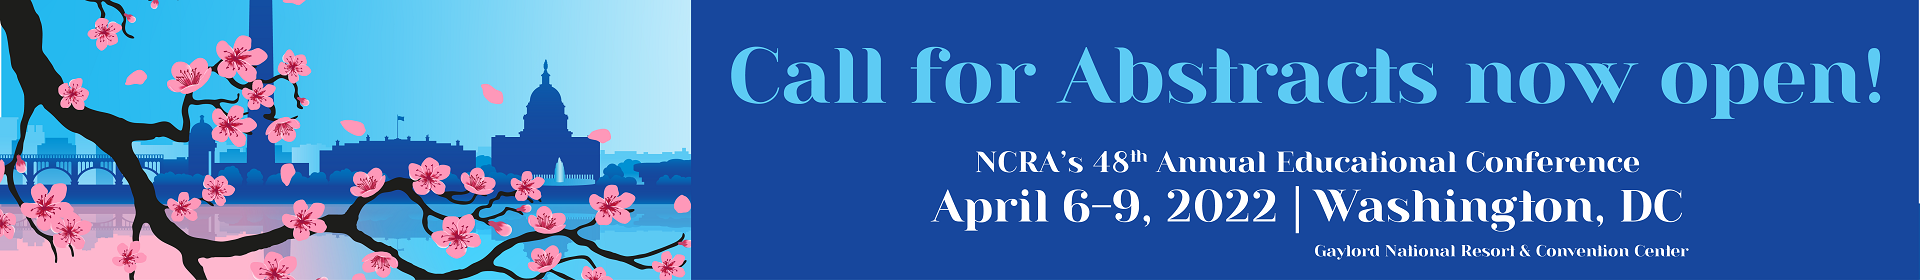 NCRA's 48th Annual Educational Conference Event Banner